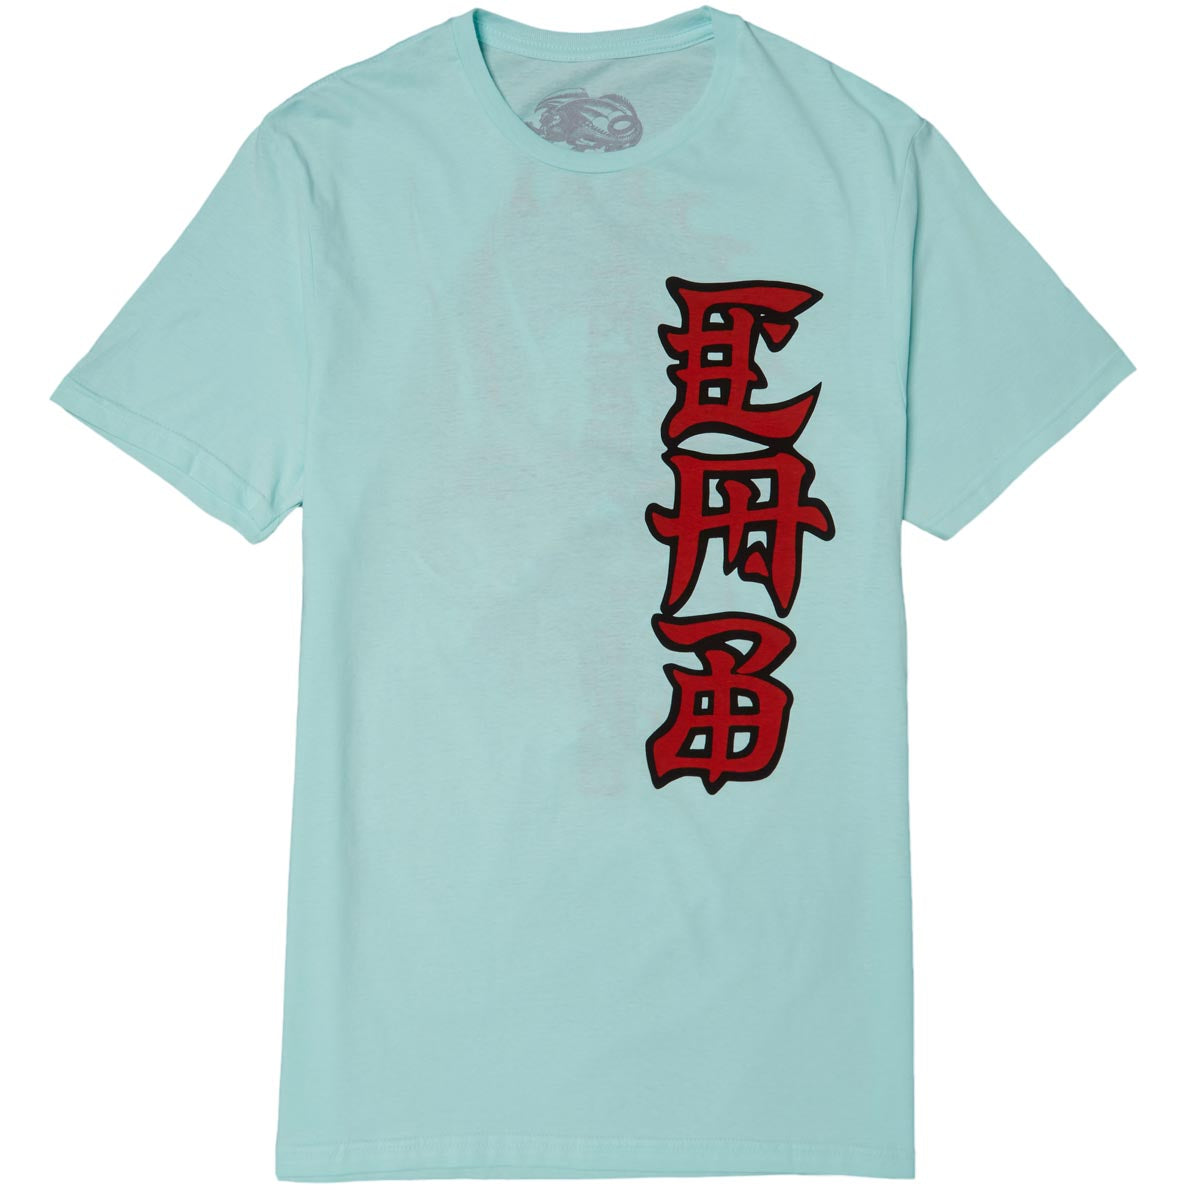 Powell-Peralta Steve Caballero Ban This T-Shirt - Teal Ice image 4